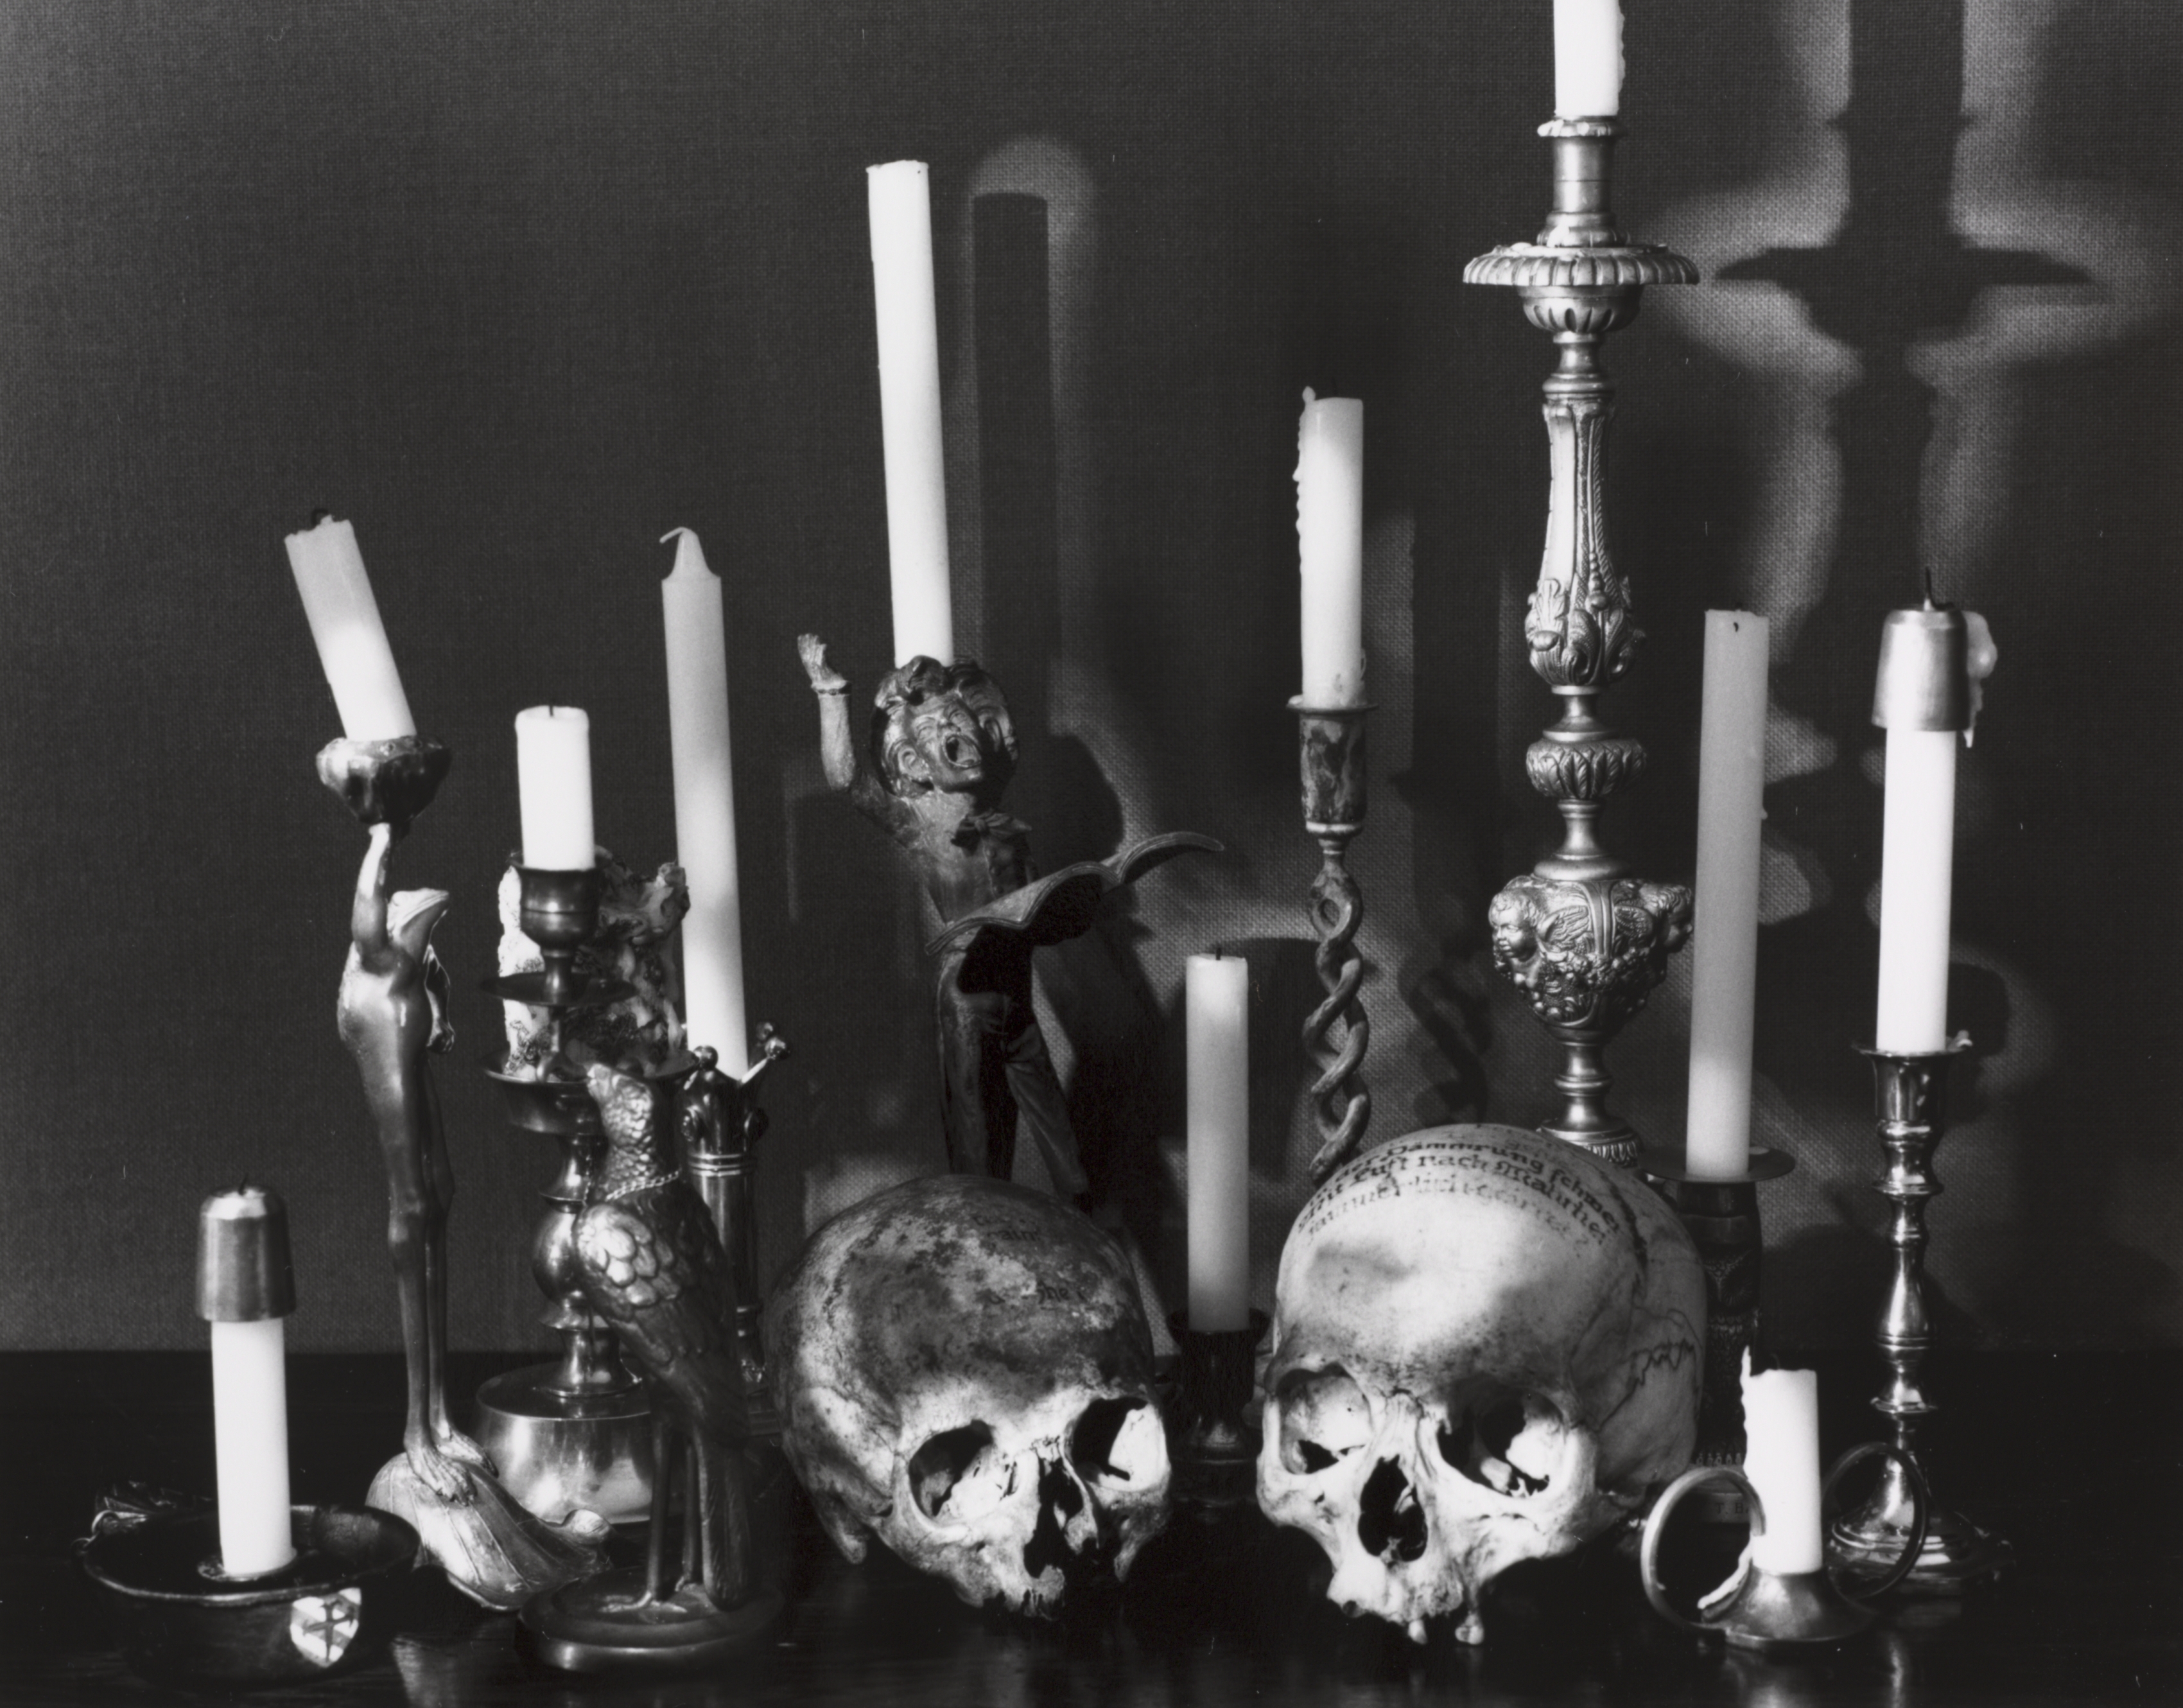 Still Life with Skulls and Candles, from the Rowfant Club Photographs